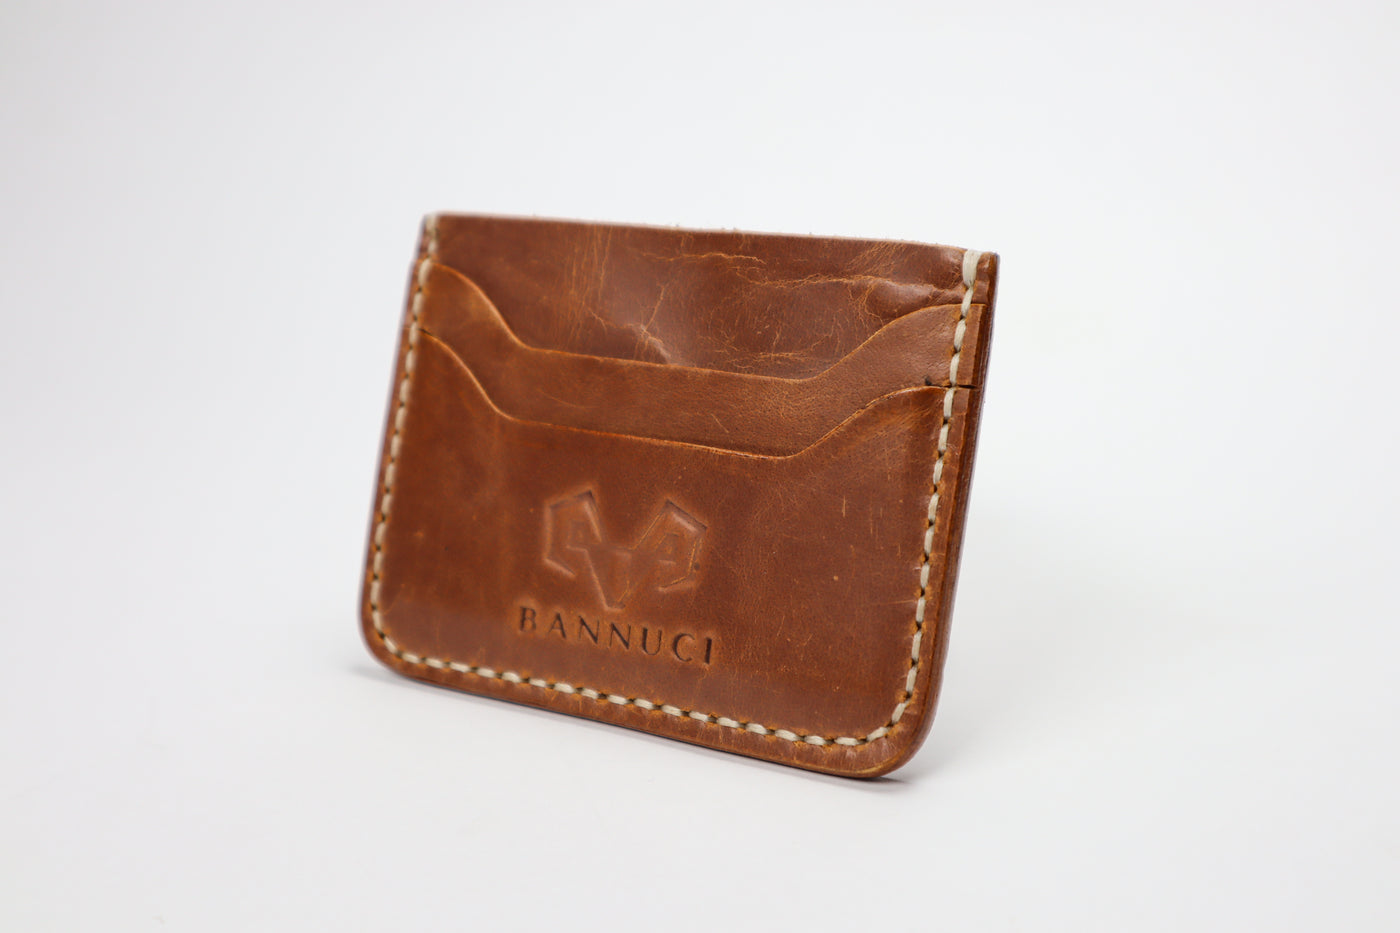 Premium Quality Tan Brown Leather Card Holder by Bannuci